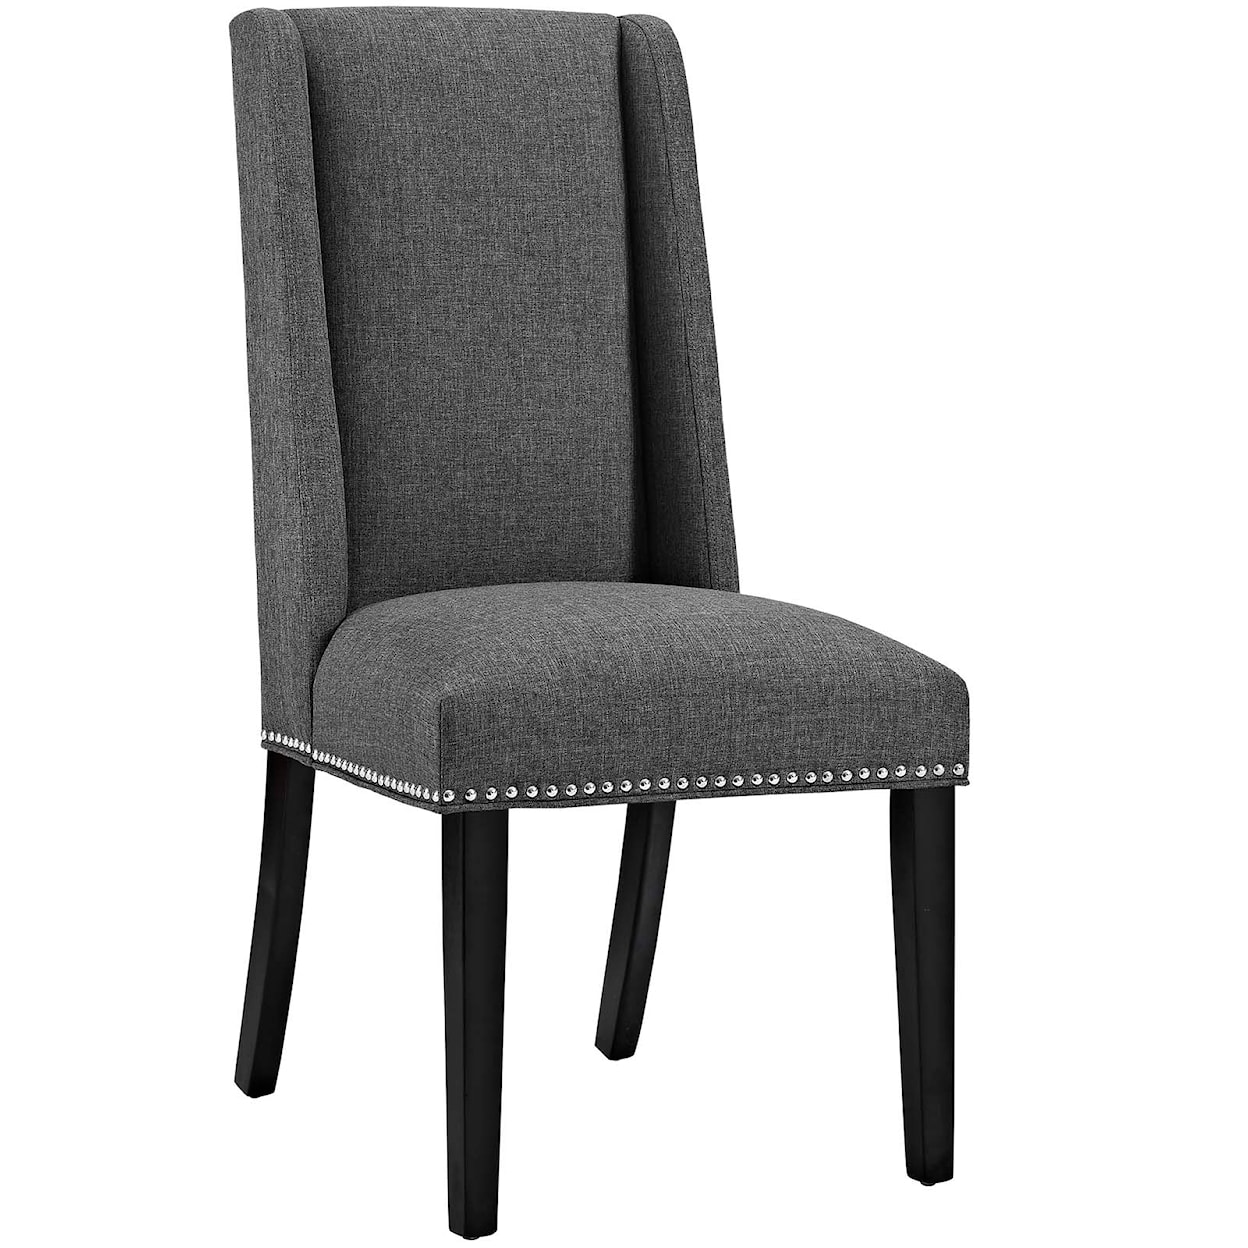 Modway Baron Dining Chair